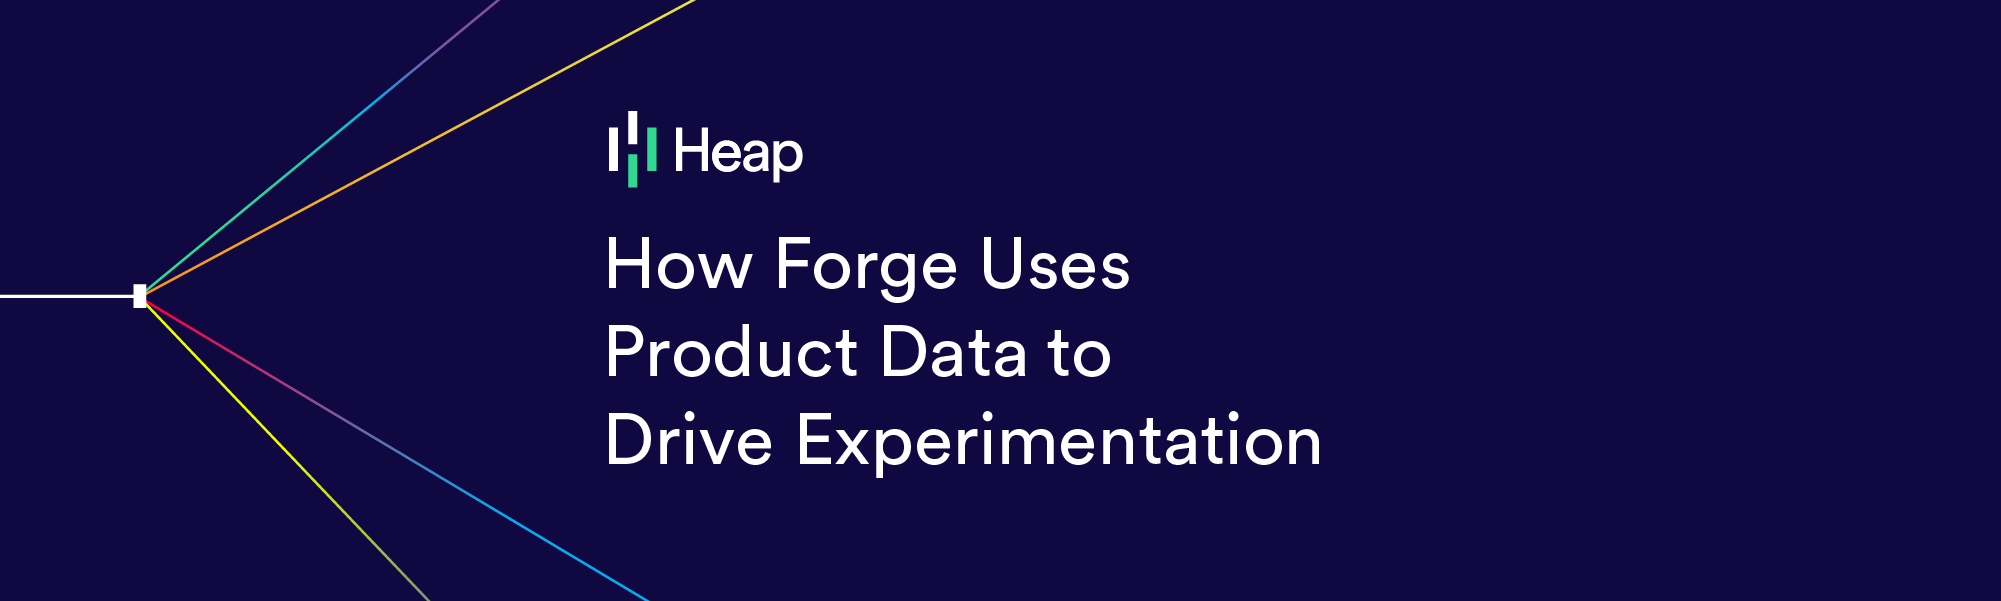 How Forge Uses Product Data to Drive Experimentation